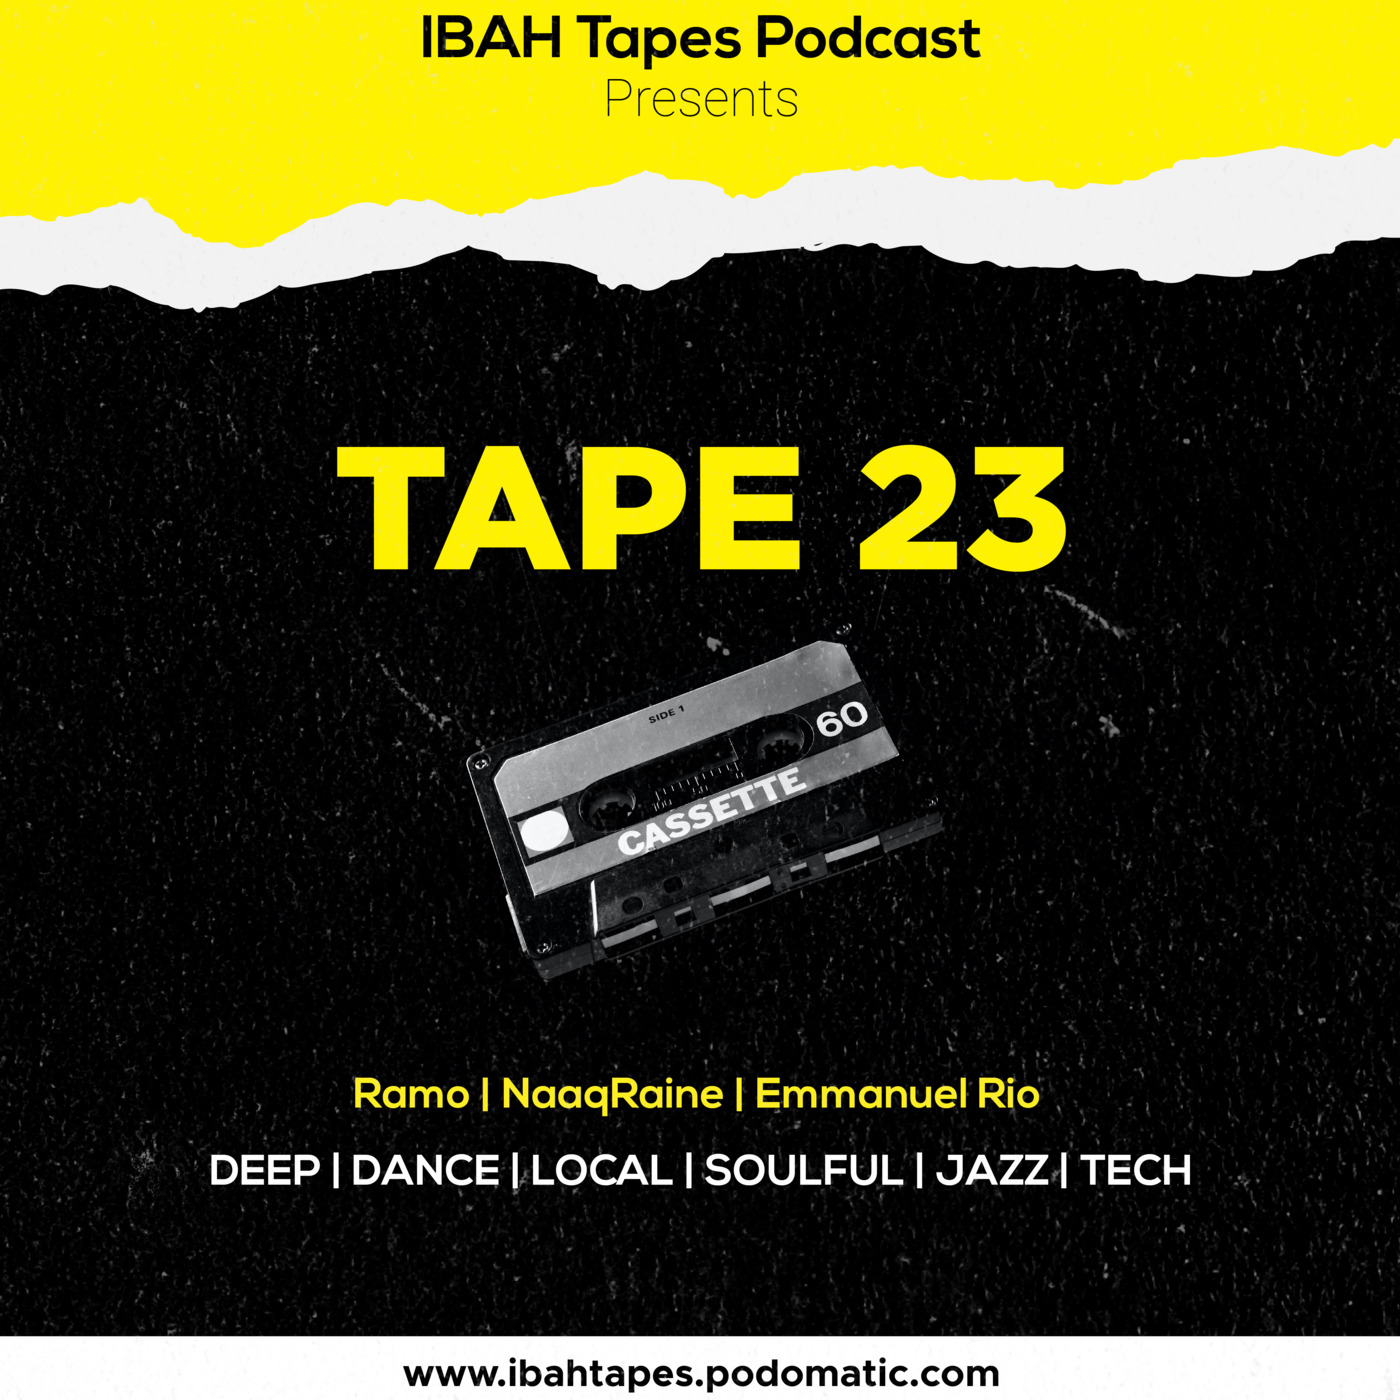 IBAH Tapes's Podcast